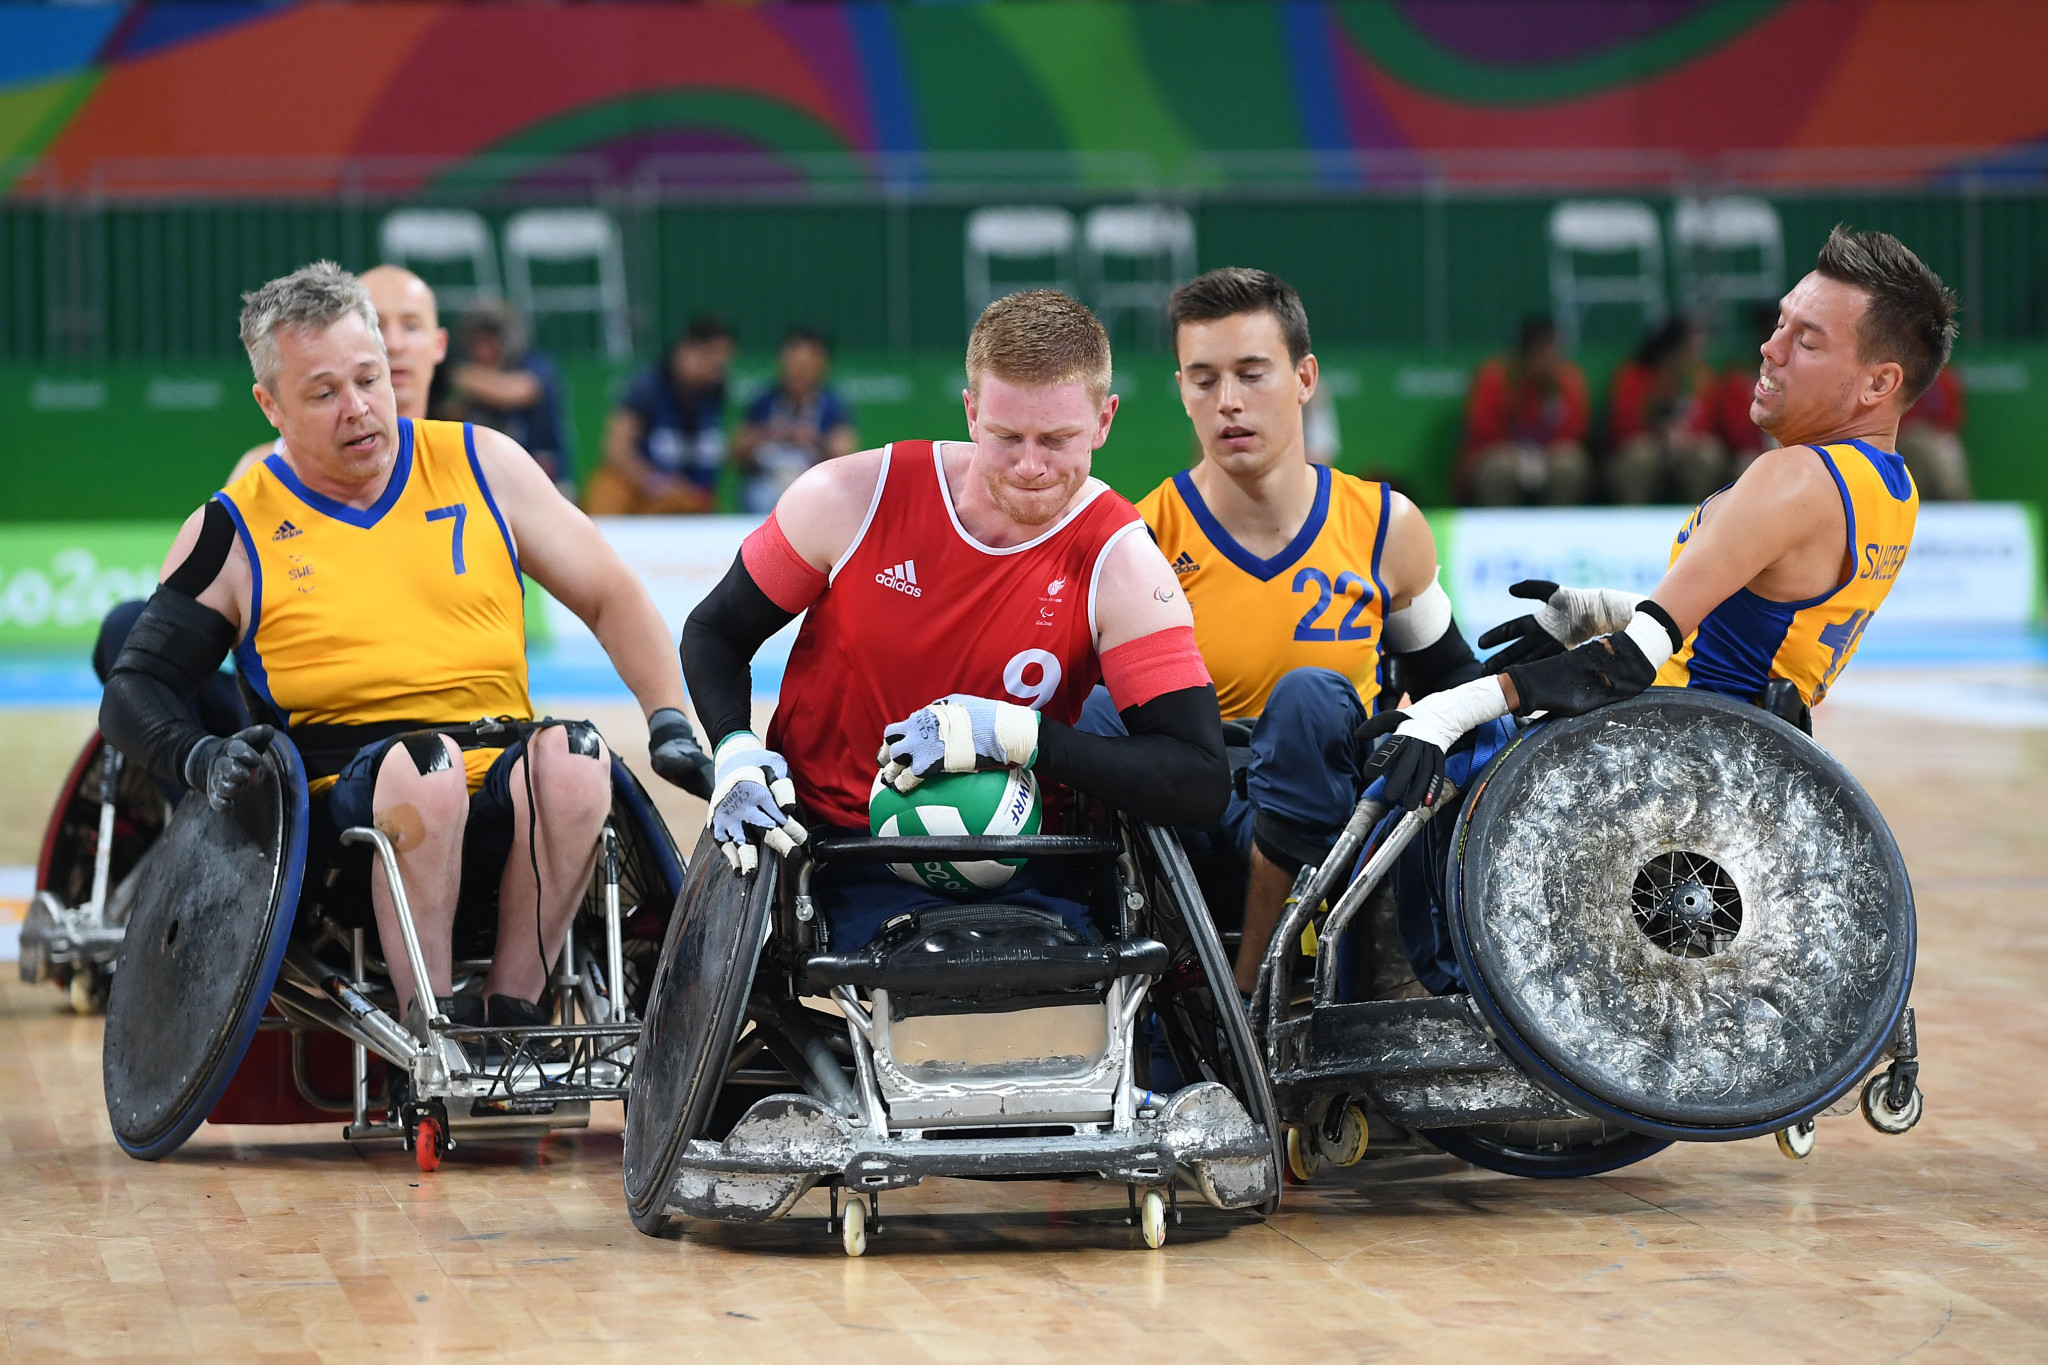 International Wheelchair Rugby Federation seeks bids for events in 2022